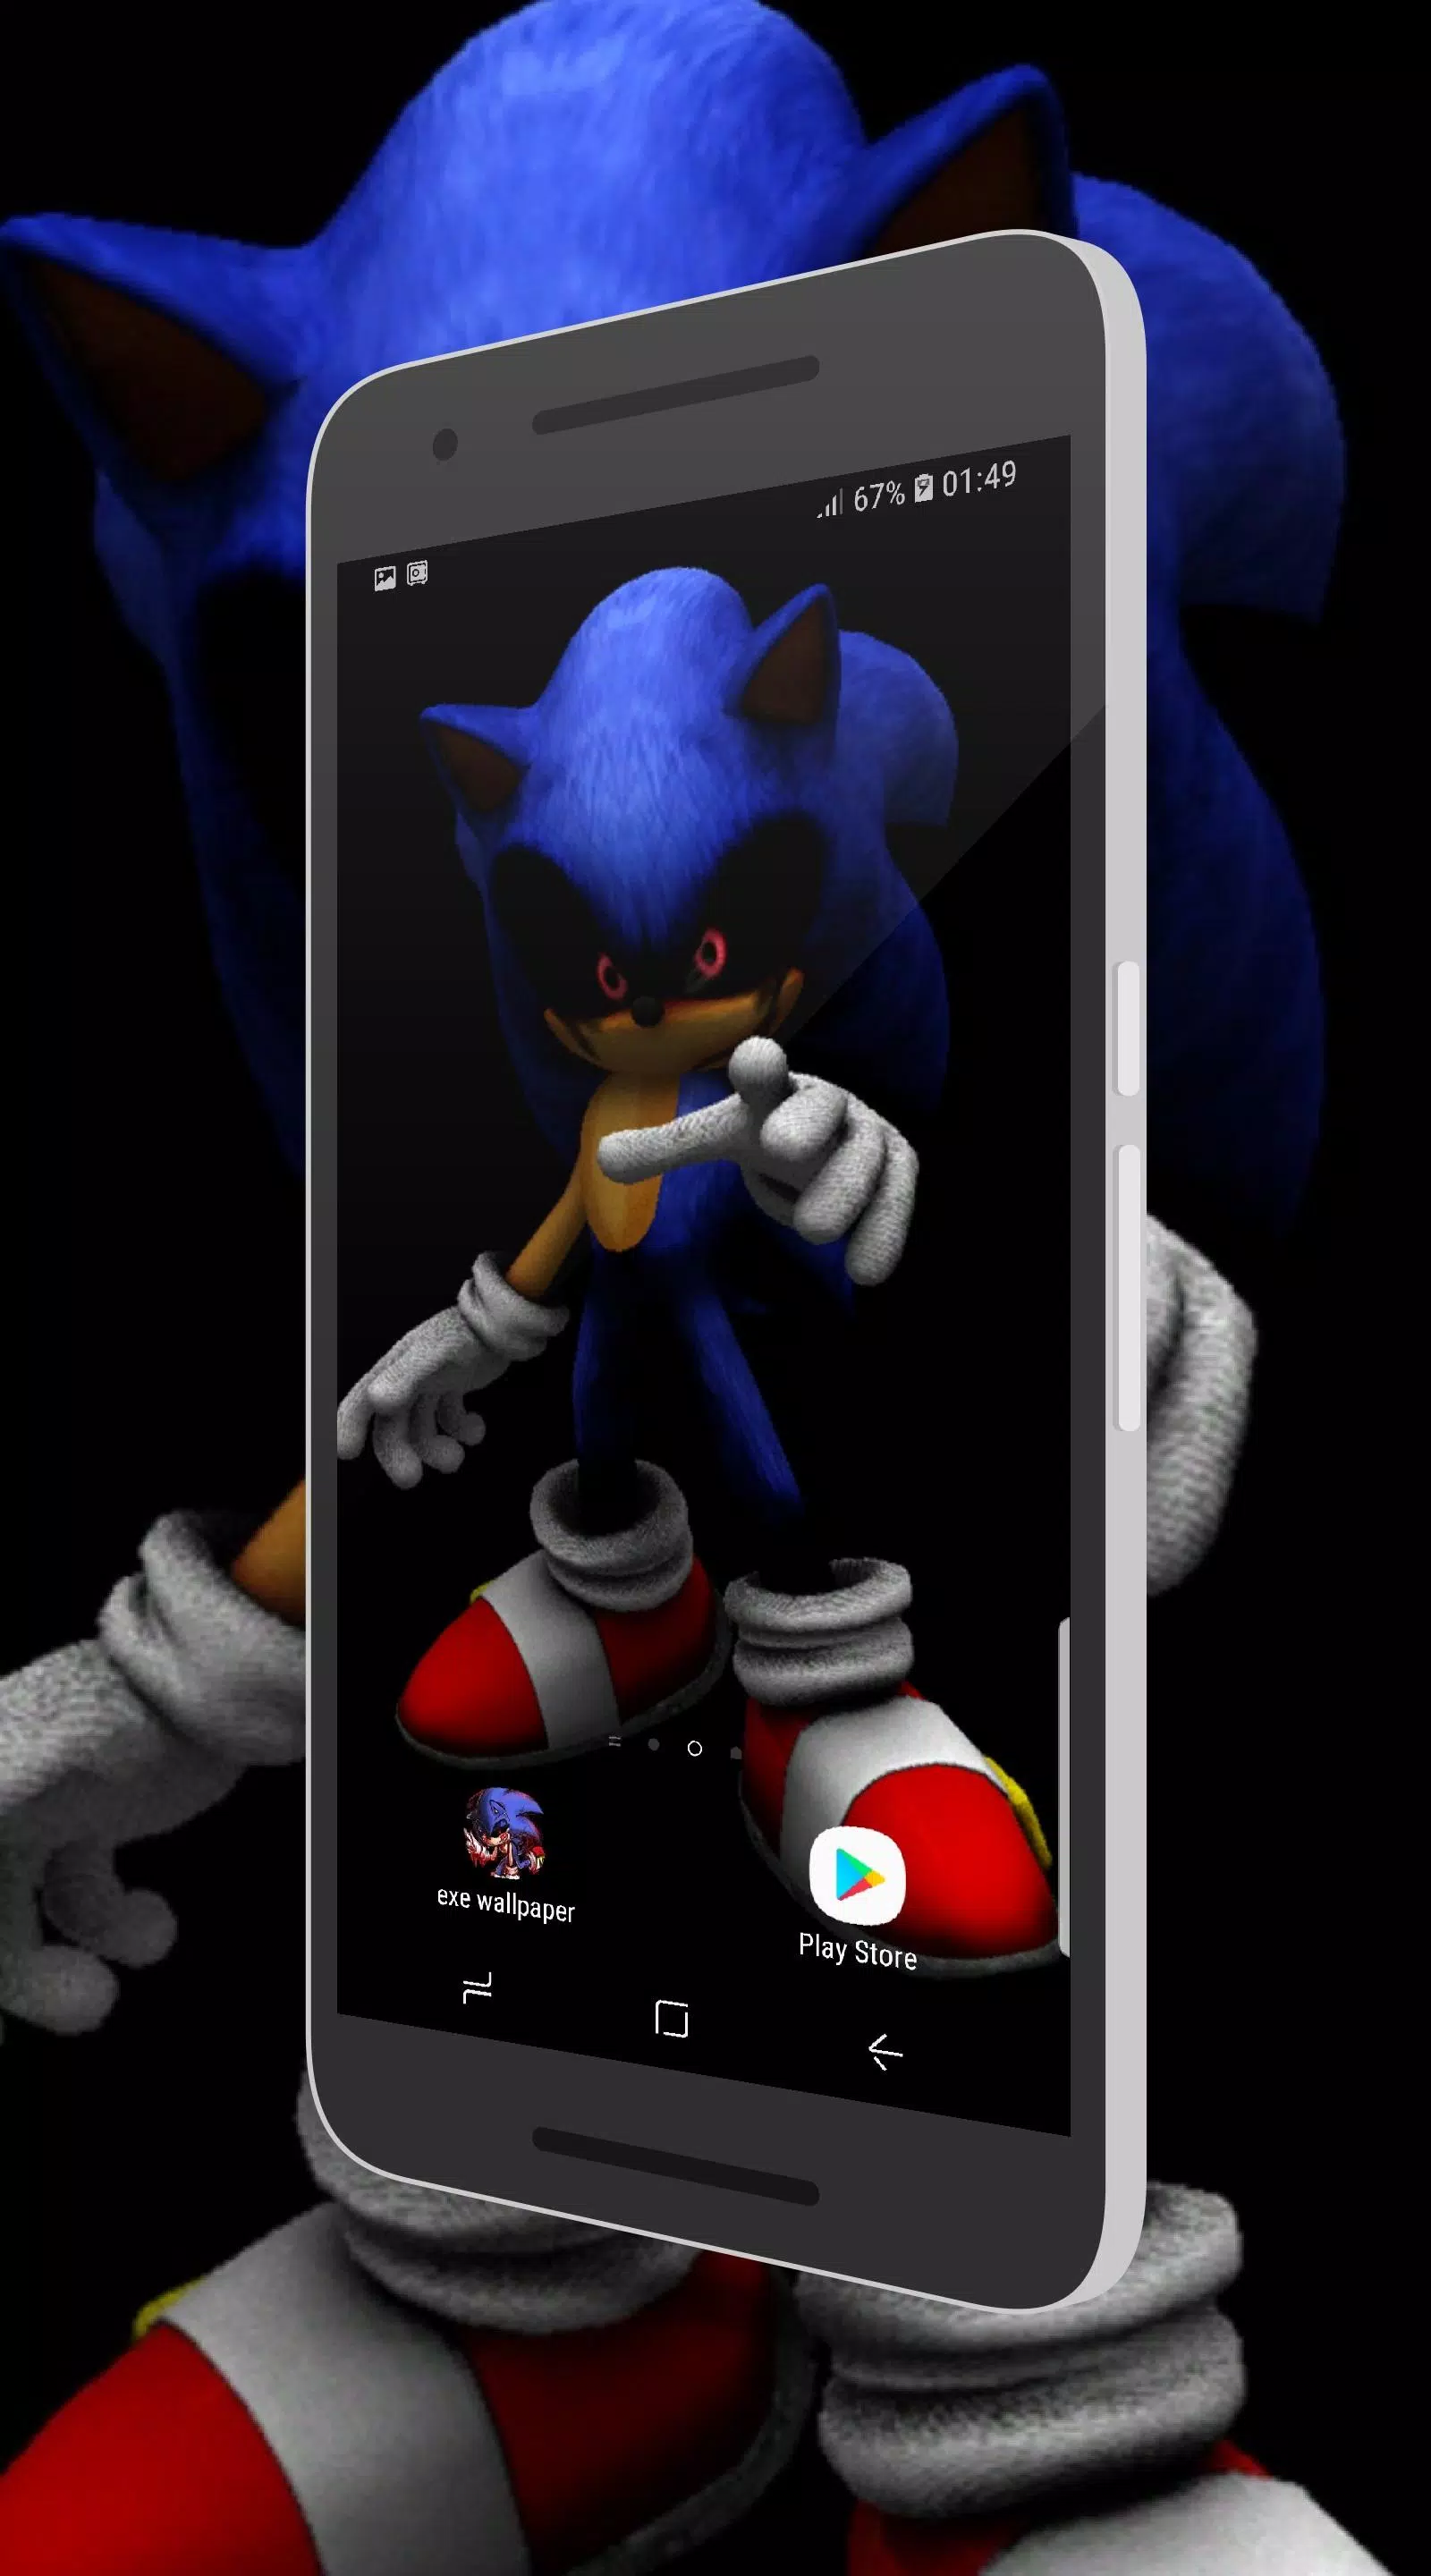 SONIC EXE WALLPAPERS Apk Download for Android- Latest version -  com.gomawotv.sonicexewallpapers2018